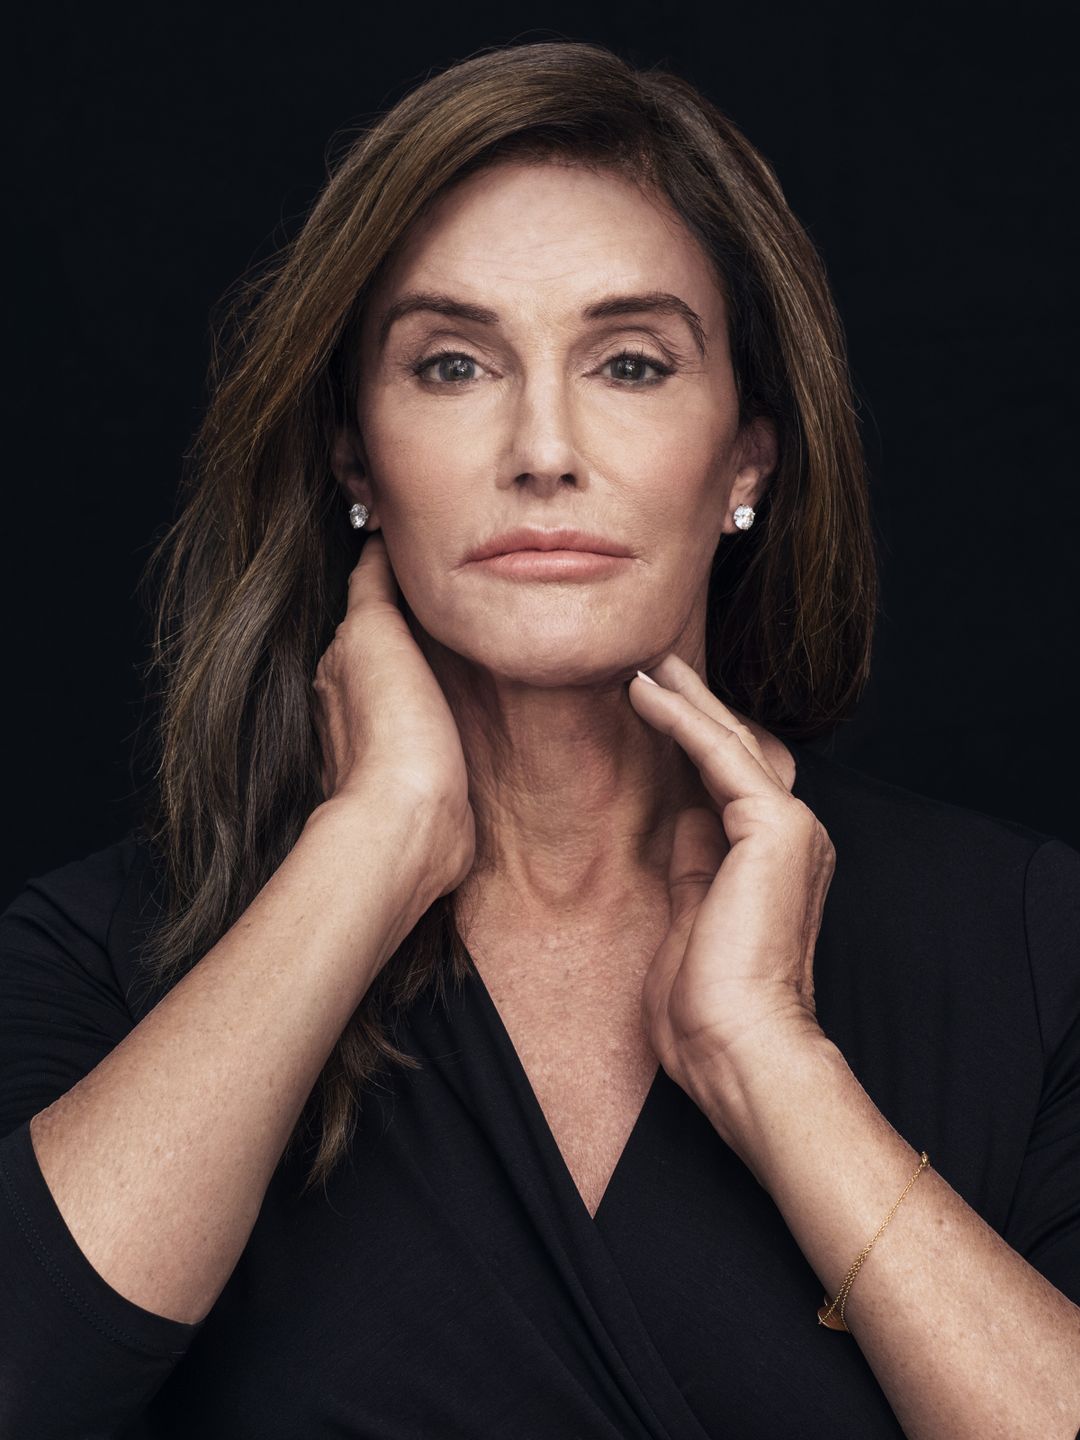 Caitlyn Jenner place of birth